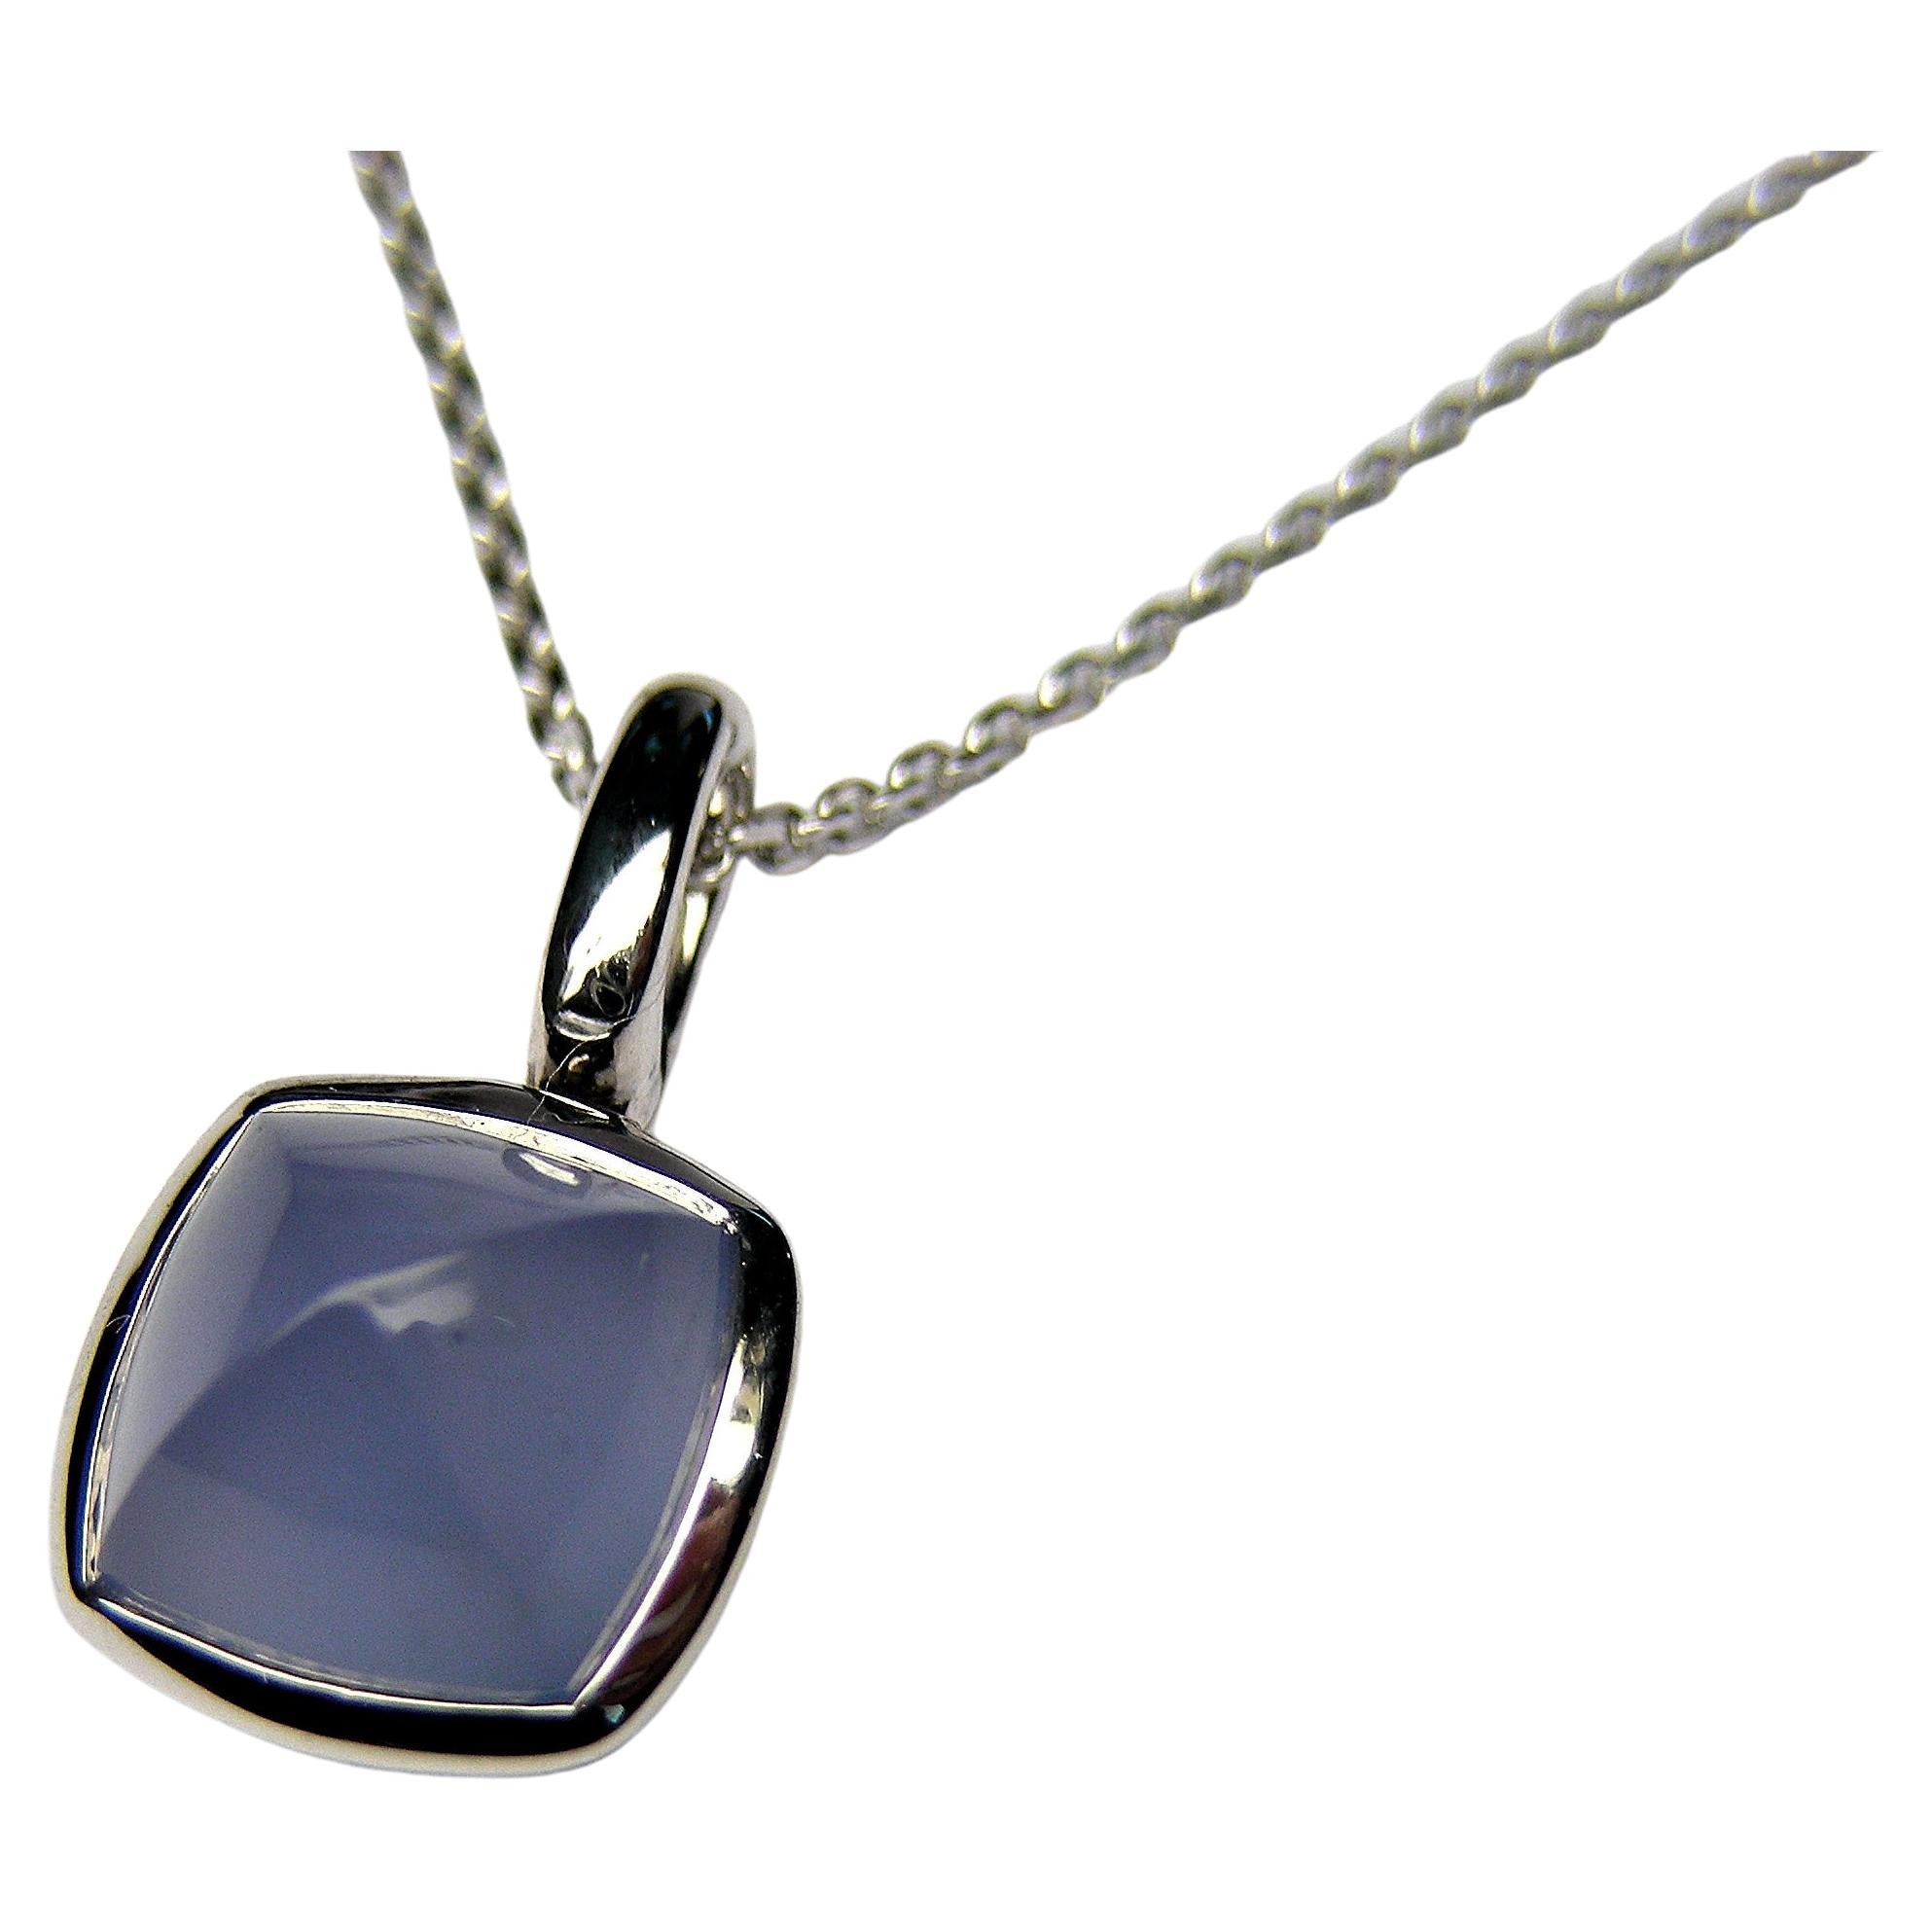 Piramid Cabochon Blue Chalcedony Ring in 18k White Gold Pendant Necklace